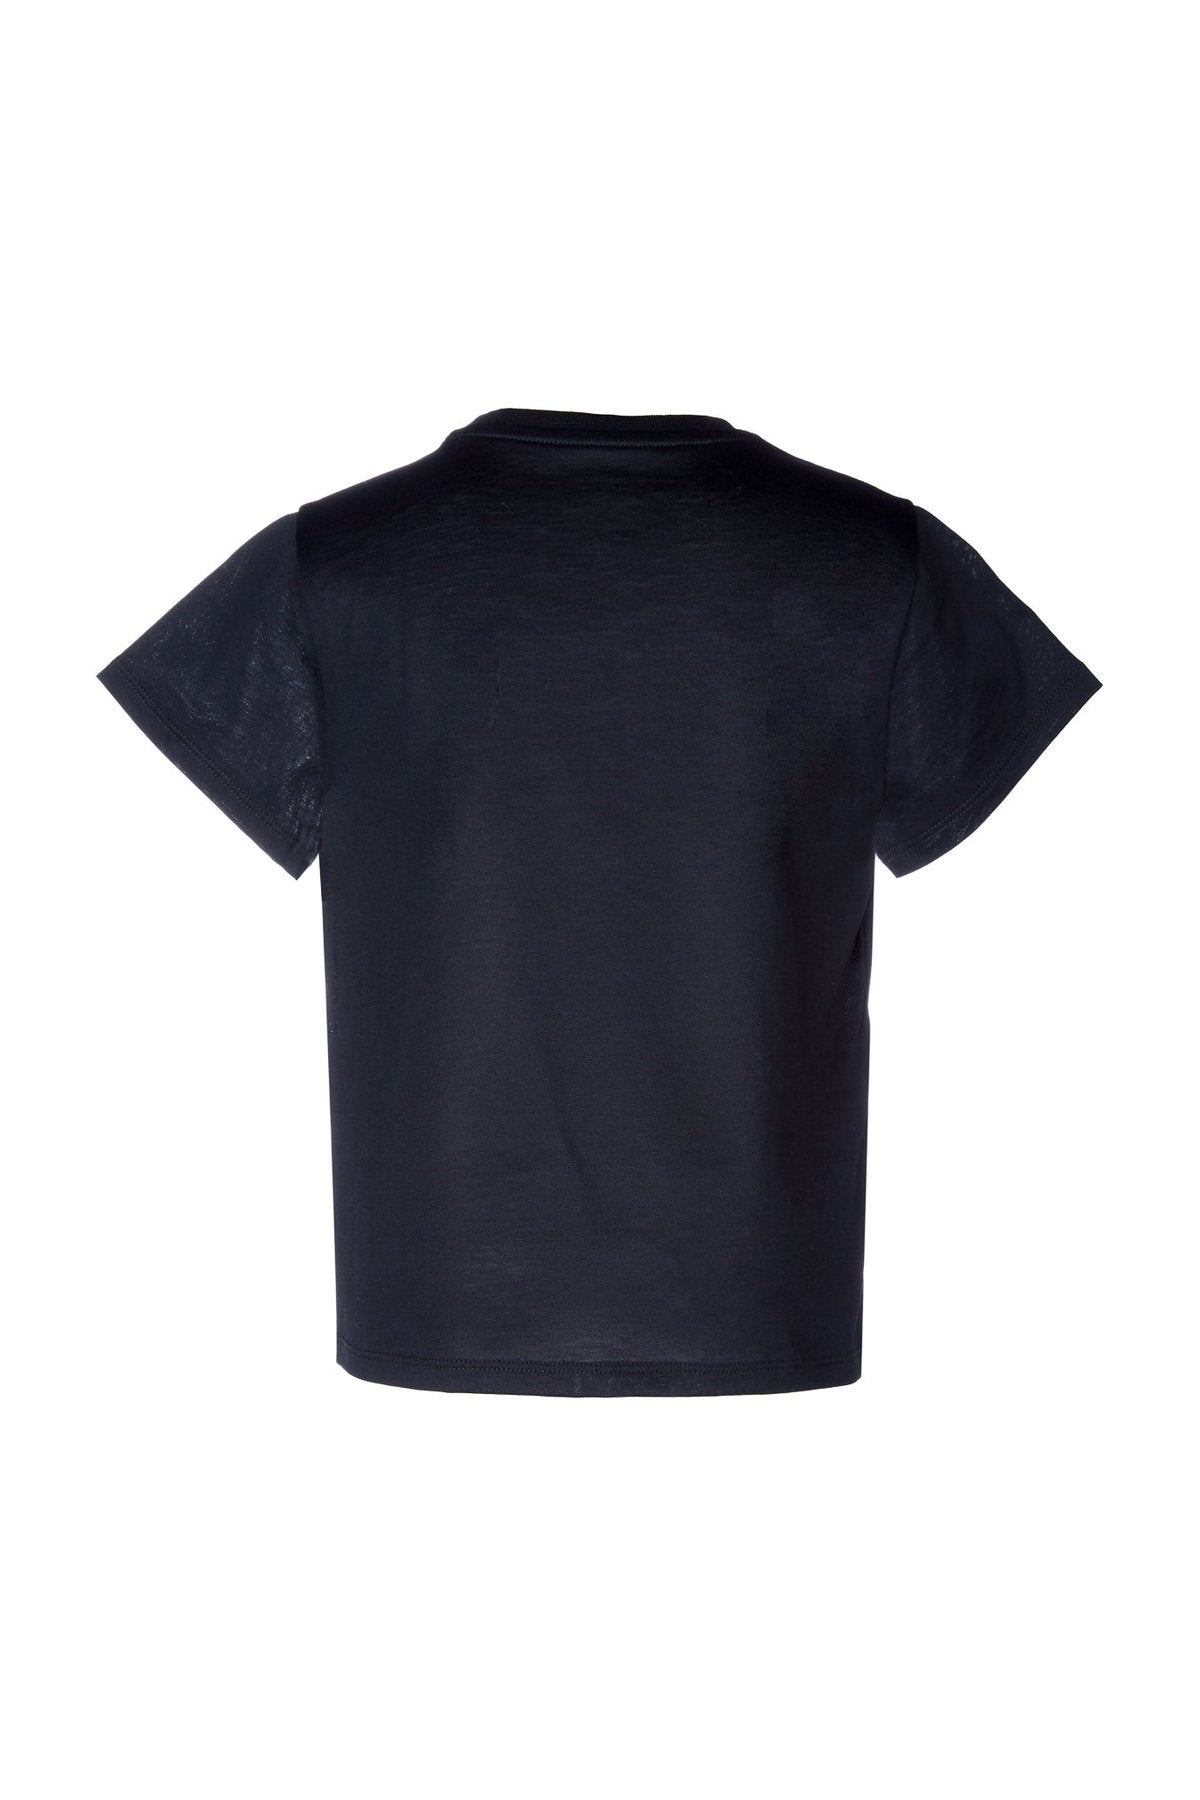 M'A KIDS EMBROIDERED T-SHIRT IN BLACK